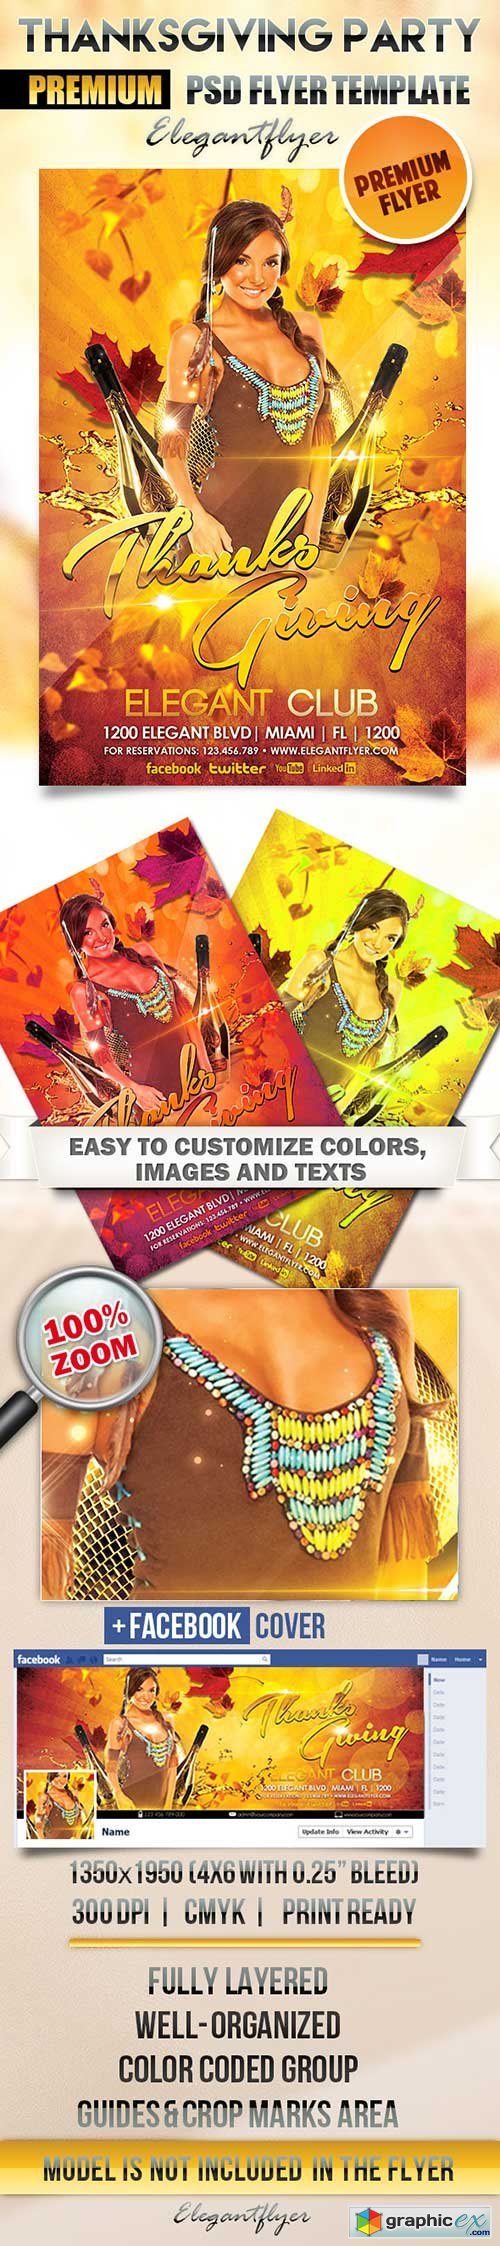 Thanksgiving Party Flyer PSD Template + Facebook Cover